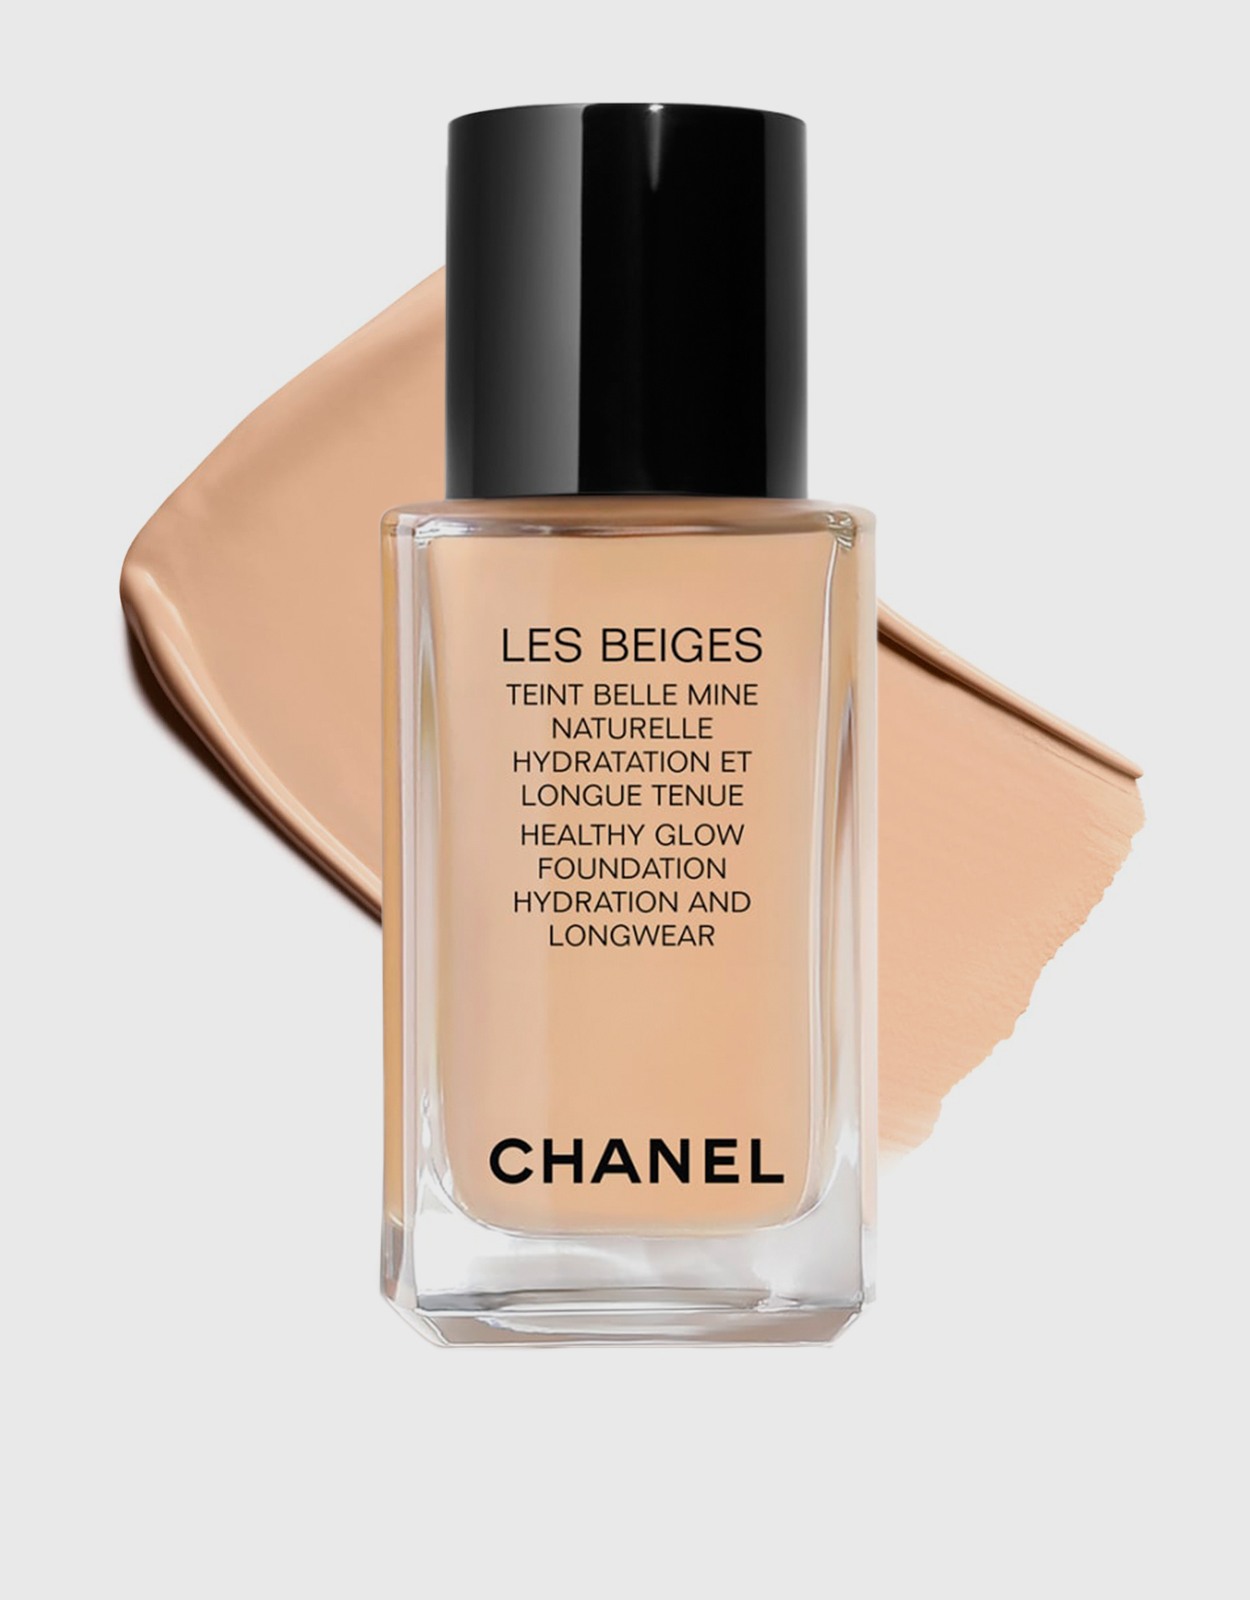 Chanel Beauty Les Beiges Healthy Glow Foundation Hydration and